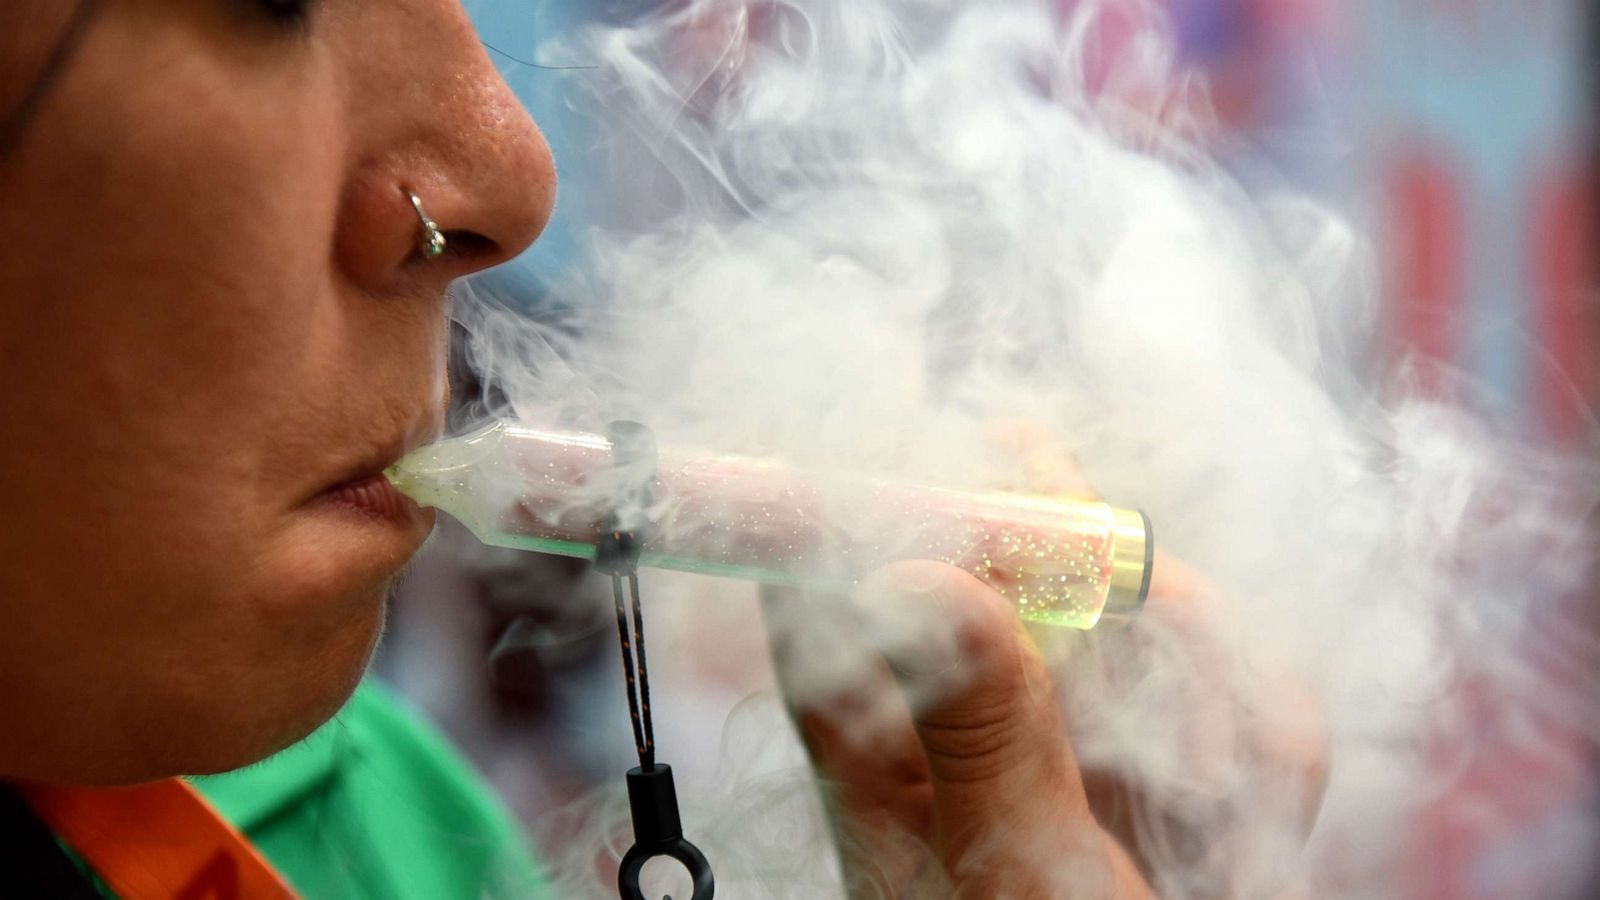 PHOTO: A person vapes on an e-cigarette during the Vaper Expo on Oct. 7, 2022, in Birmingham, England.